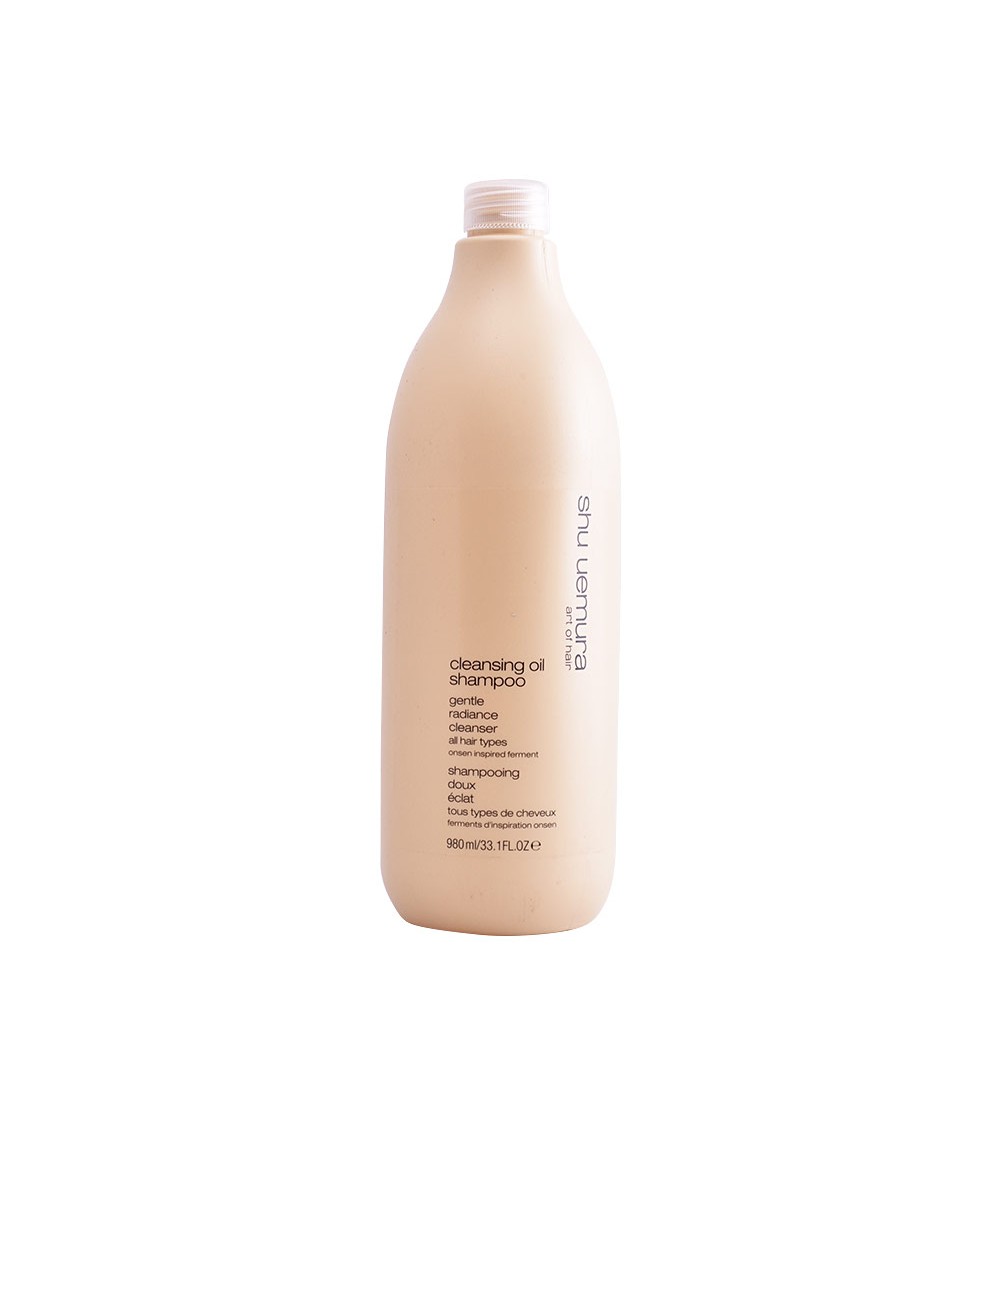 CLEANSING OIL Shampoing doux 980 ml